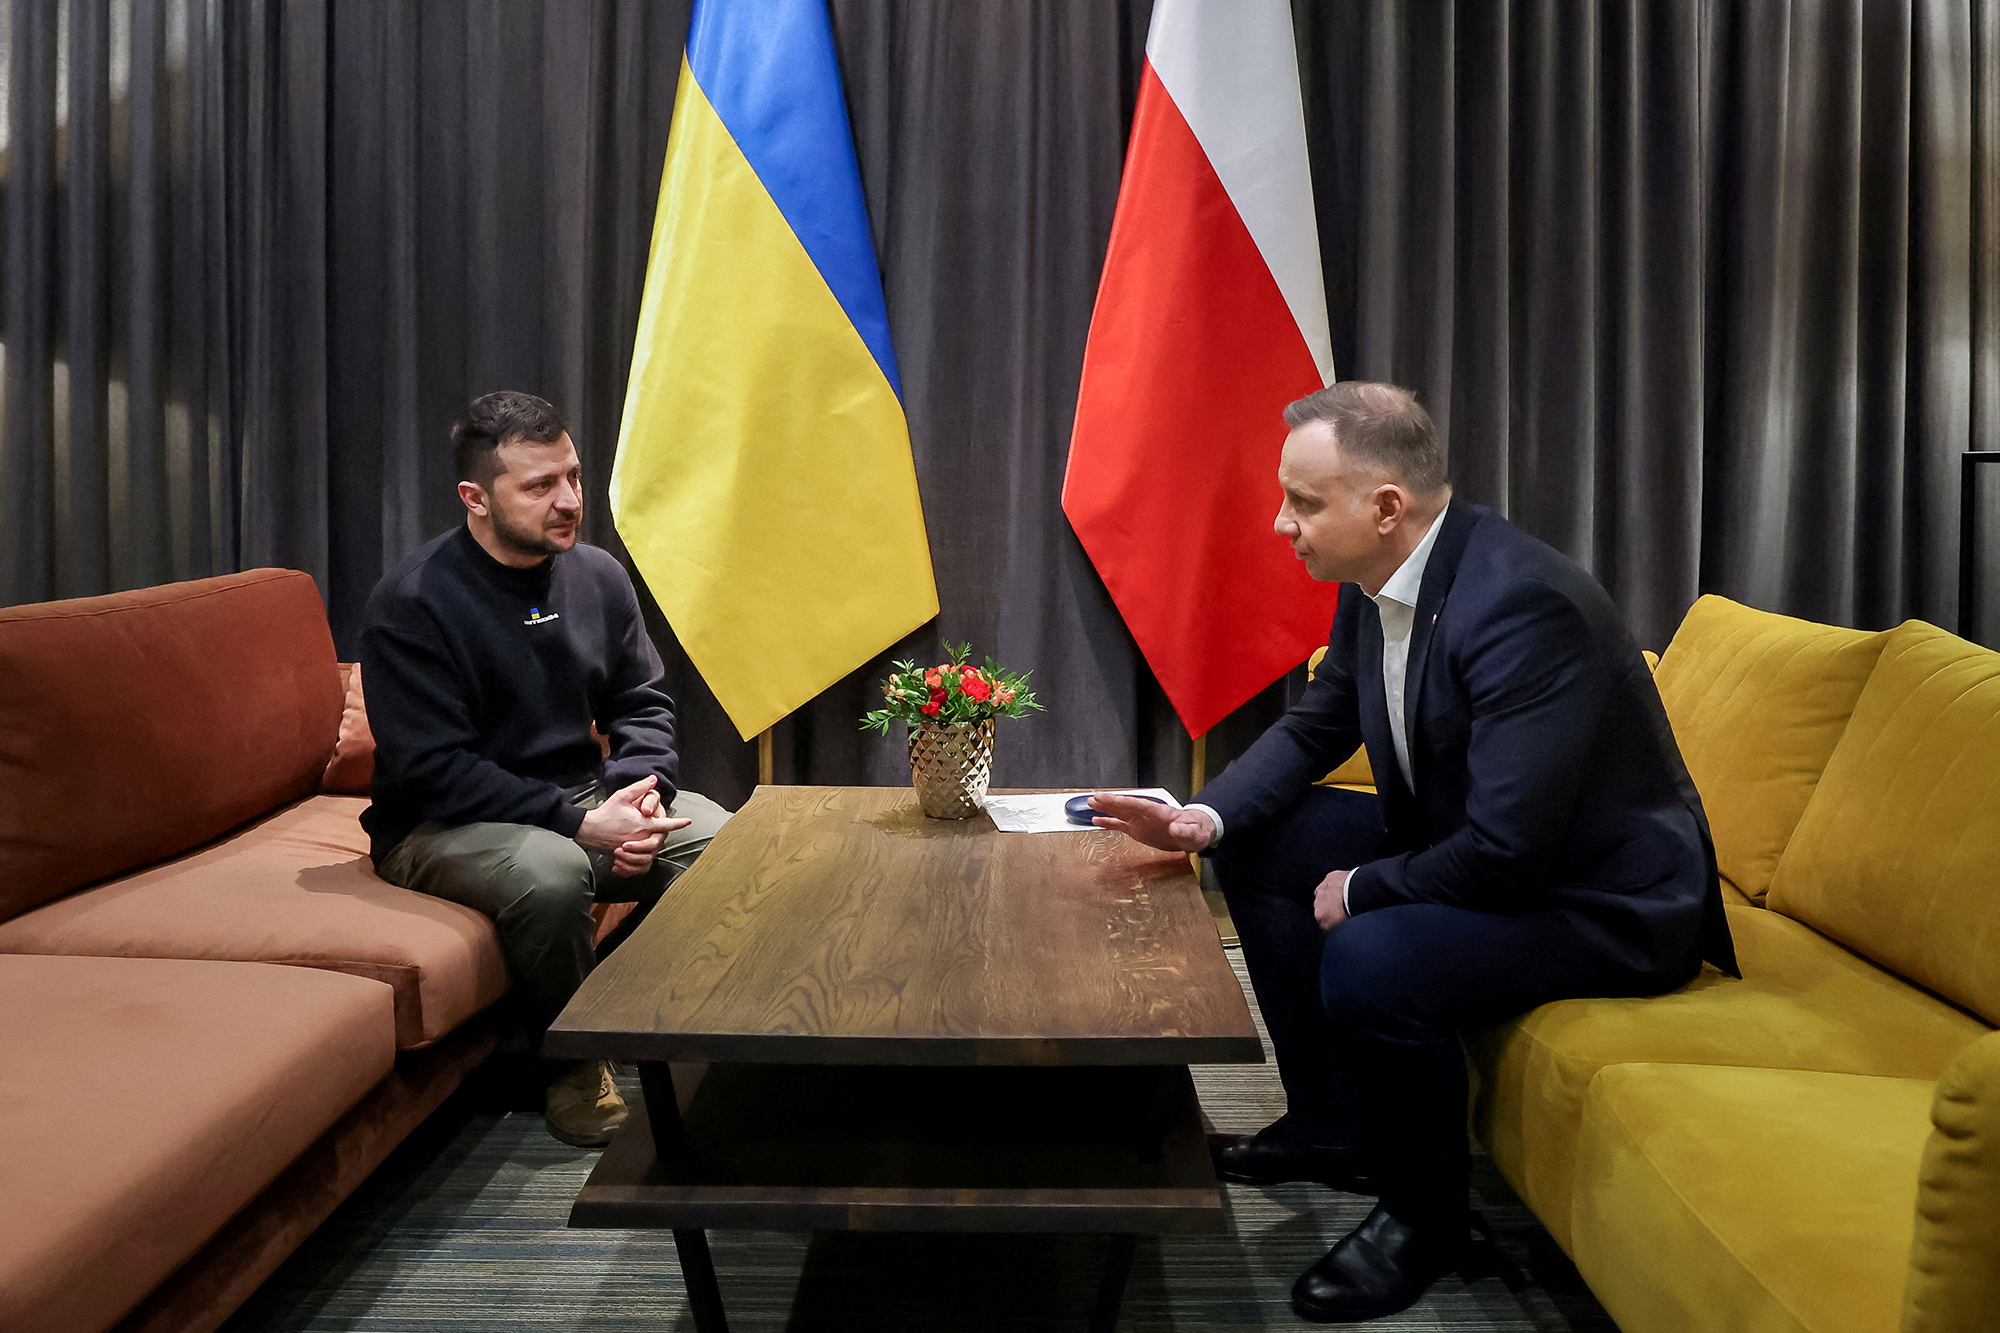 Zelensky attends a meeting with Polish President Andrzej Duda in Rzeszow, Poland, on February 10.